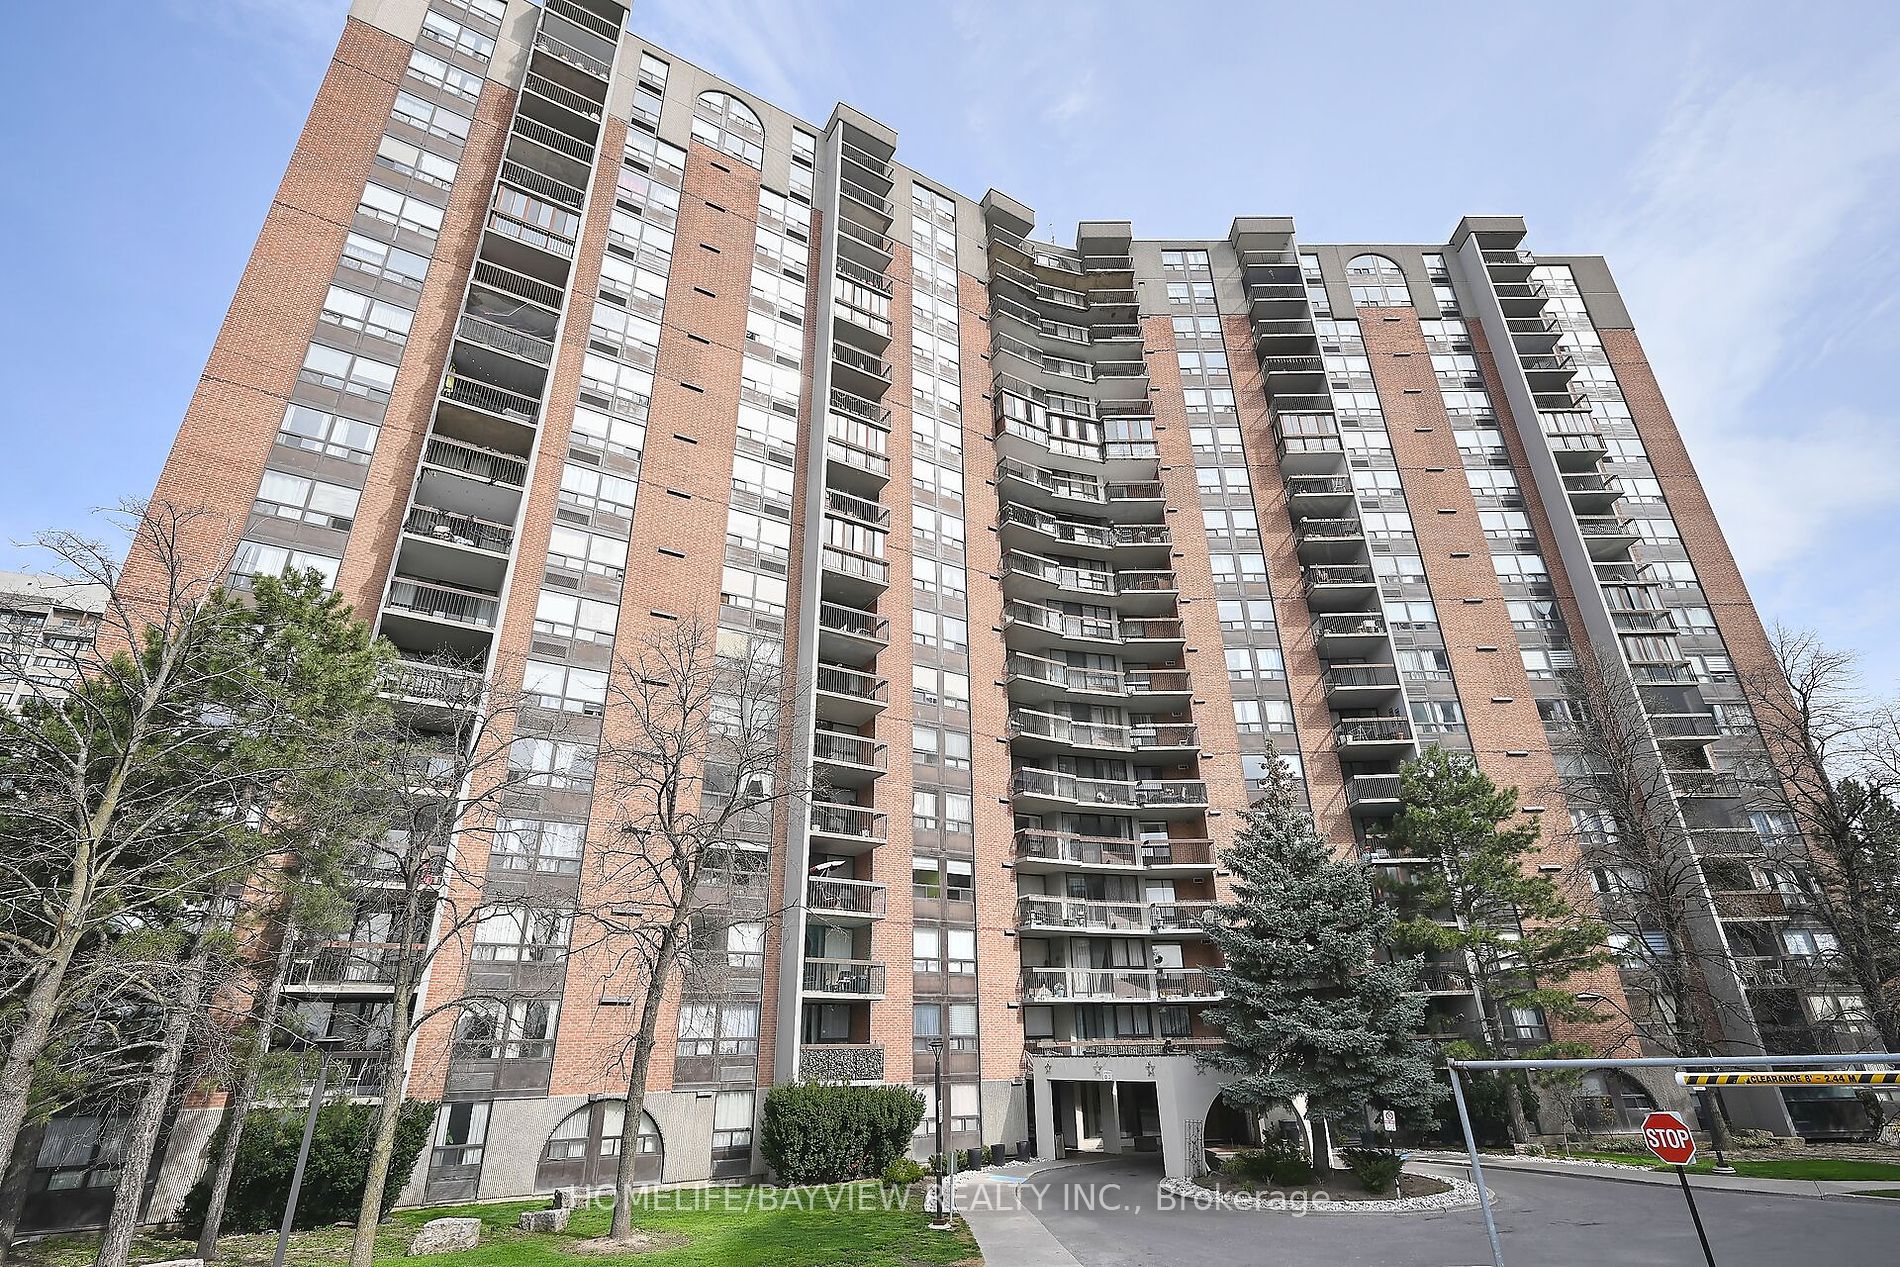 Condo Apt house for sale at 20 Mississauga V Mississauga Ontario